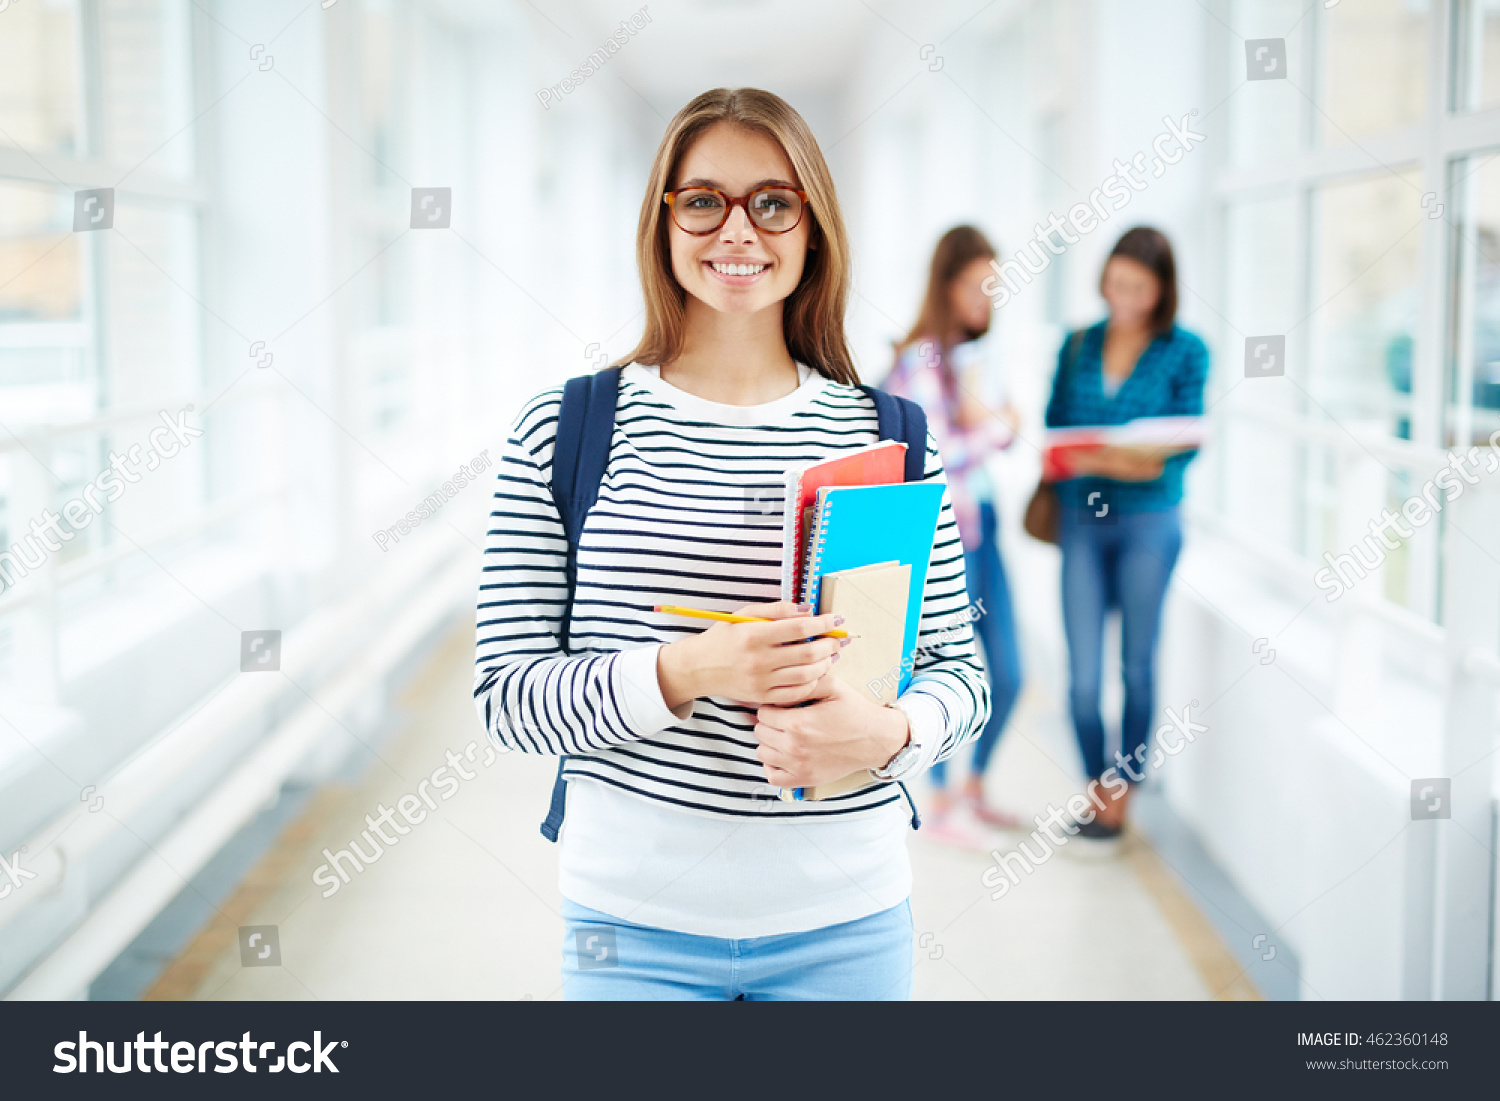 Portrait of female college student smiling at camera #462360148